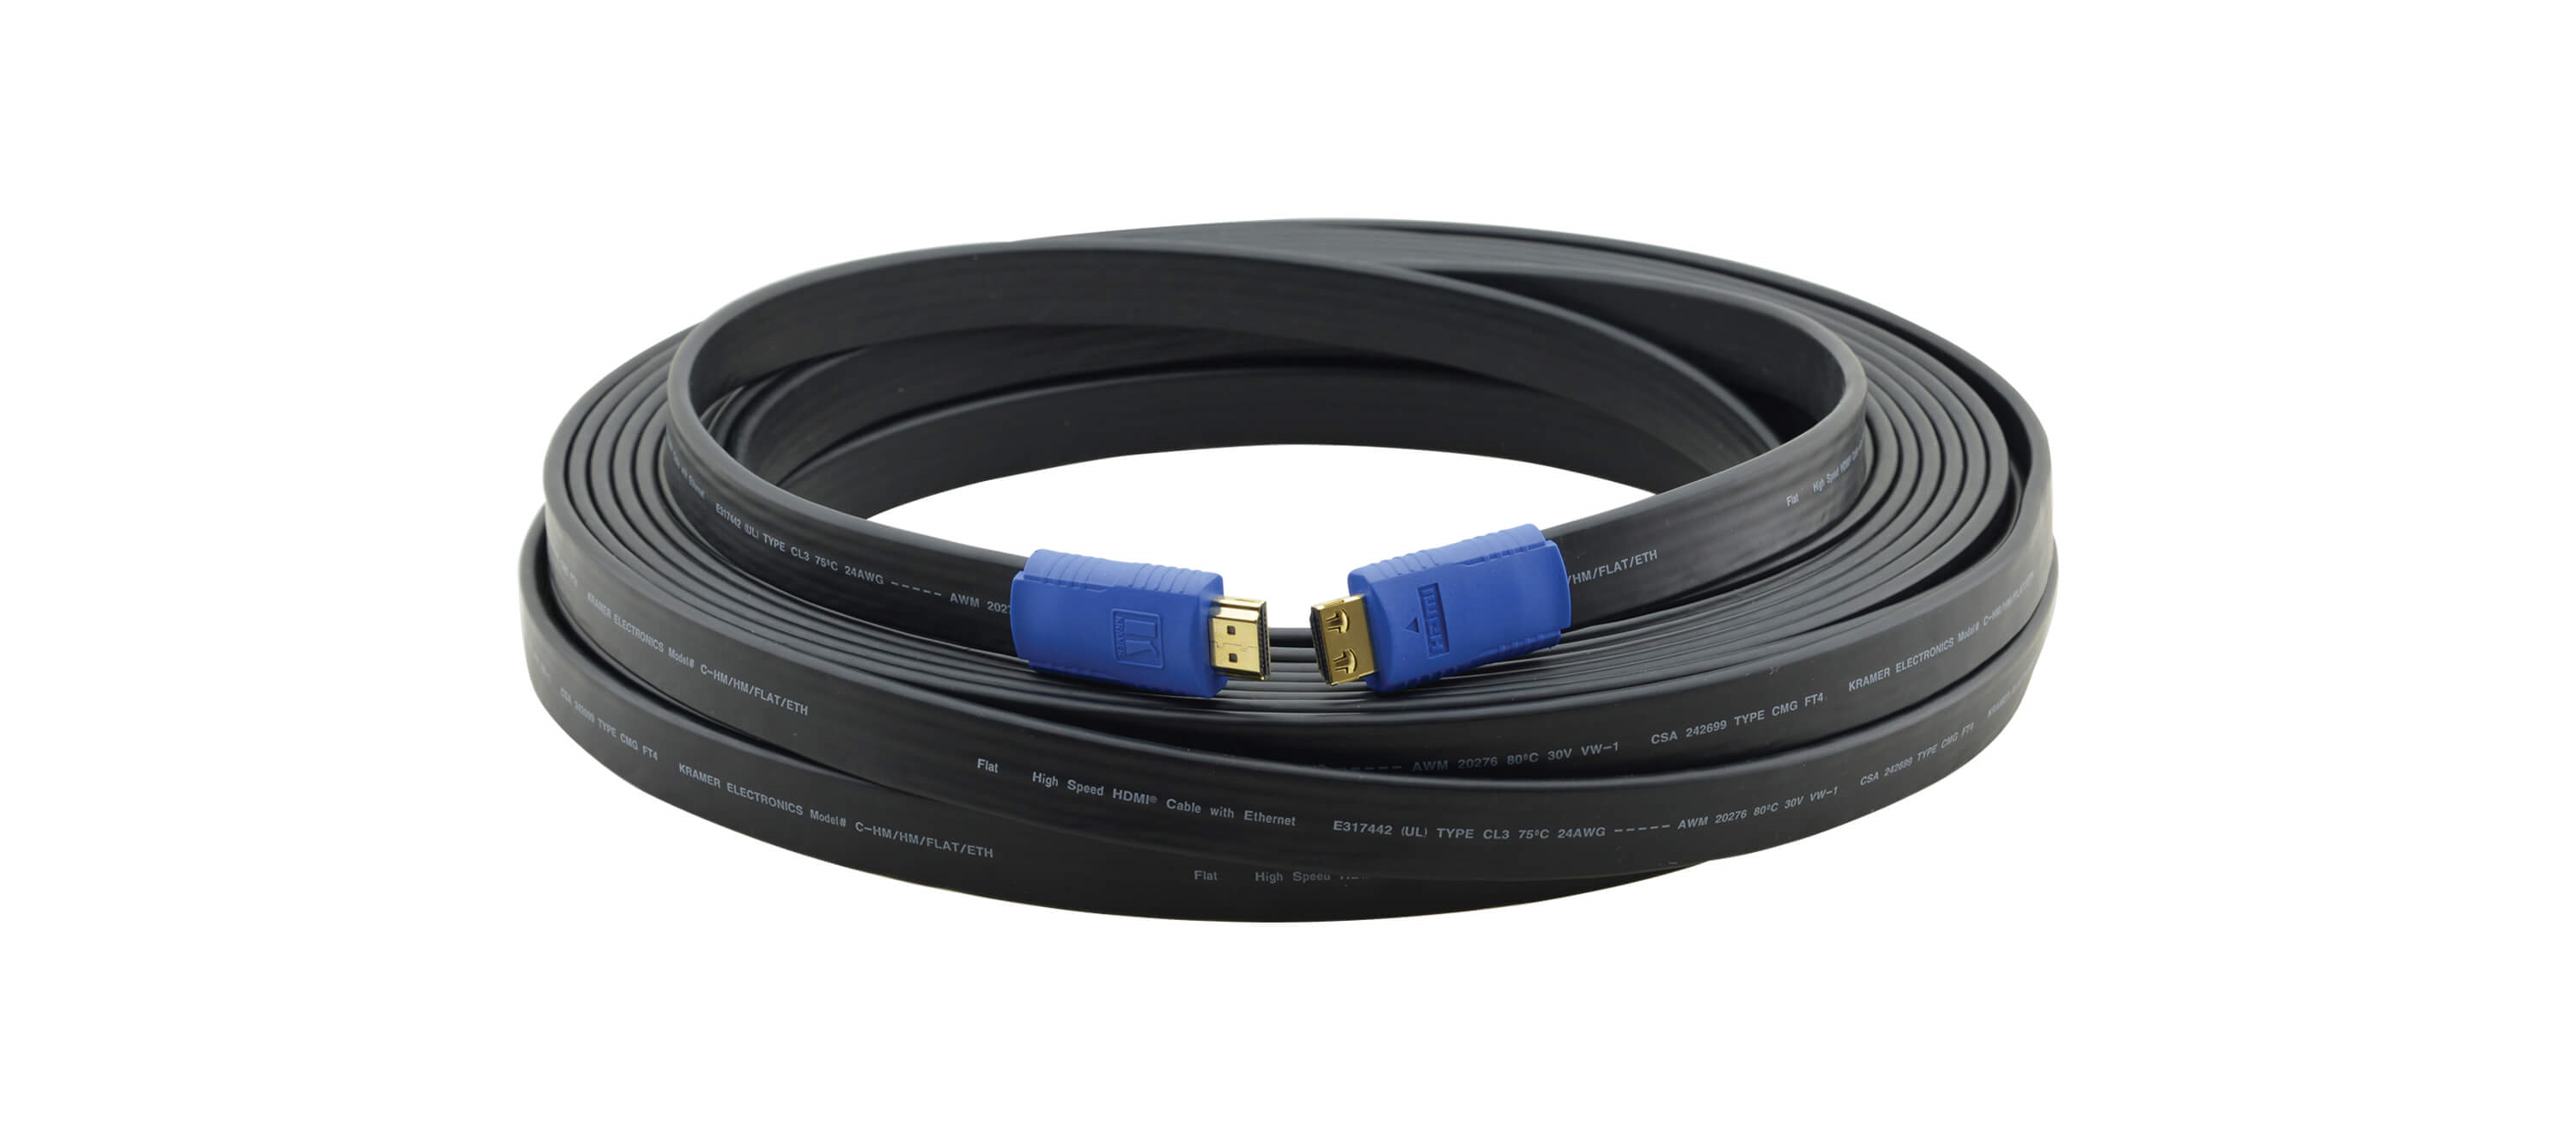 C-HM/HM/FLAT/ETH-25 Flat High–Speed HDMI Cable with Ethernet - 25'